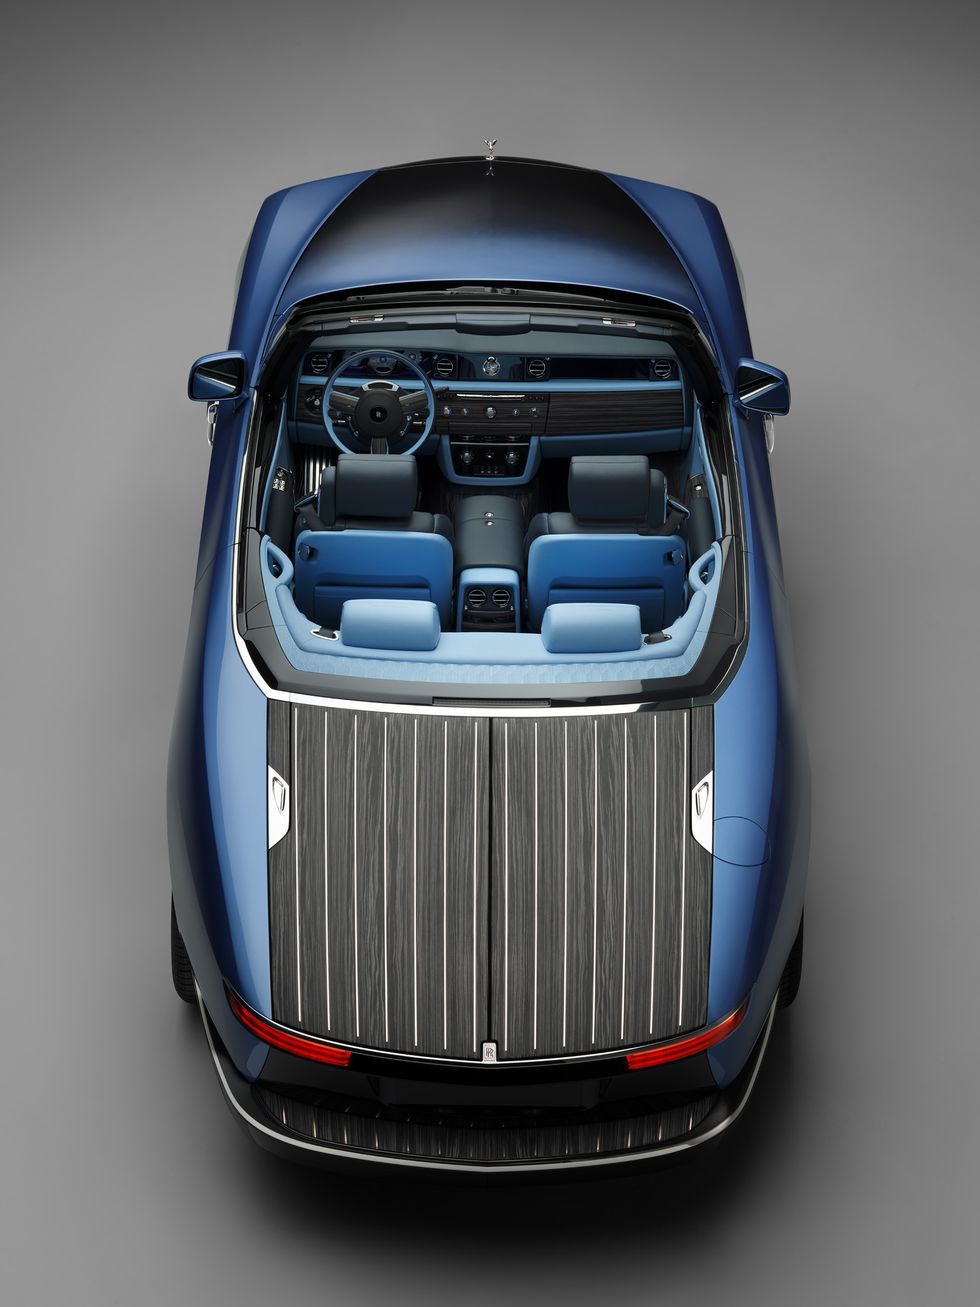 Rolls-Royce Announces Its Coachbuild Division With the Stunning